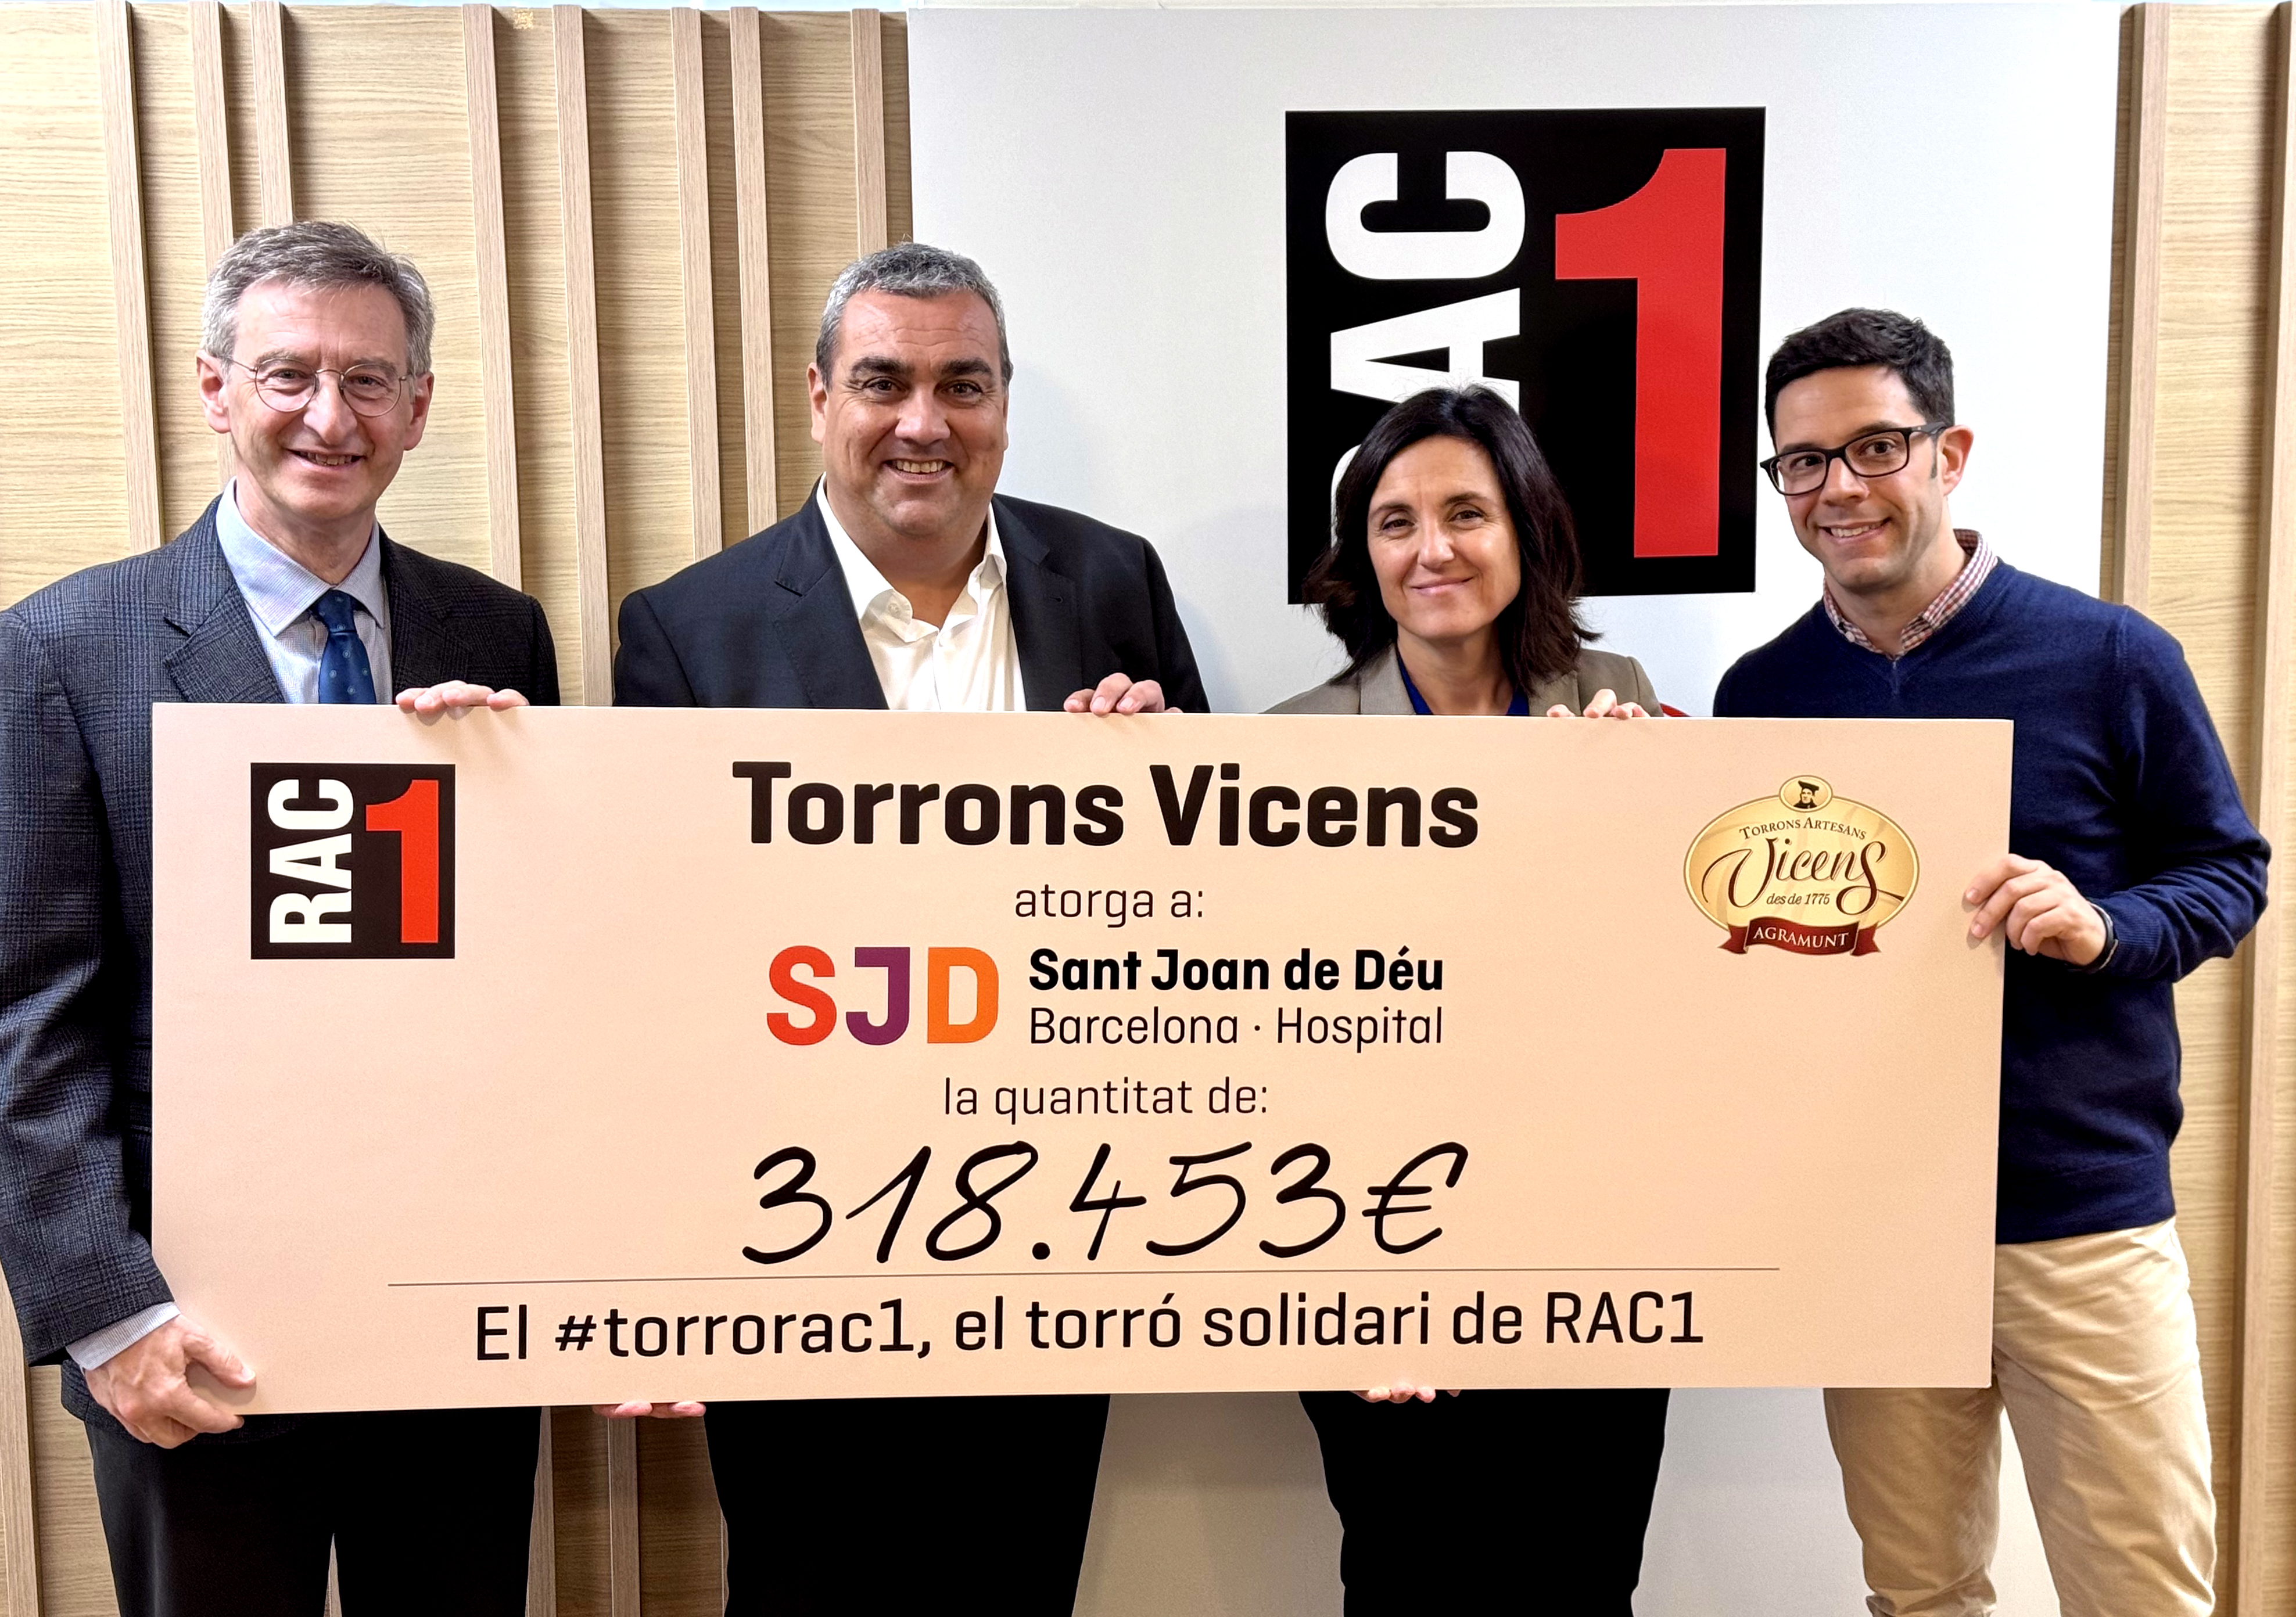 RAC1 and Torrons Vicens's Solidarity Nougat raises over two million euros for children's minority diseases